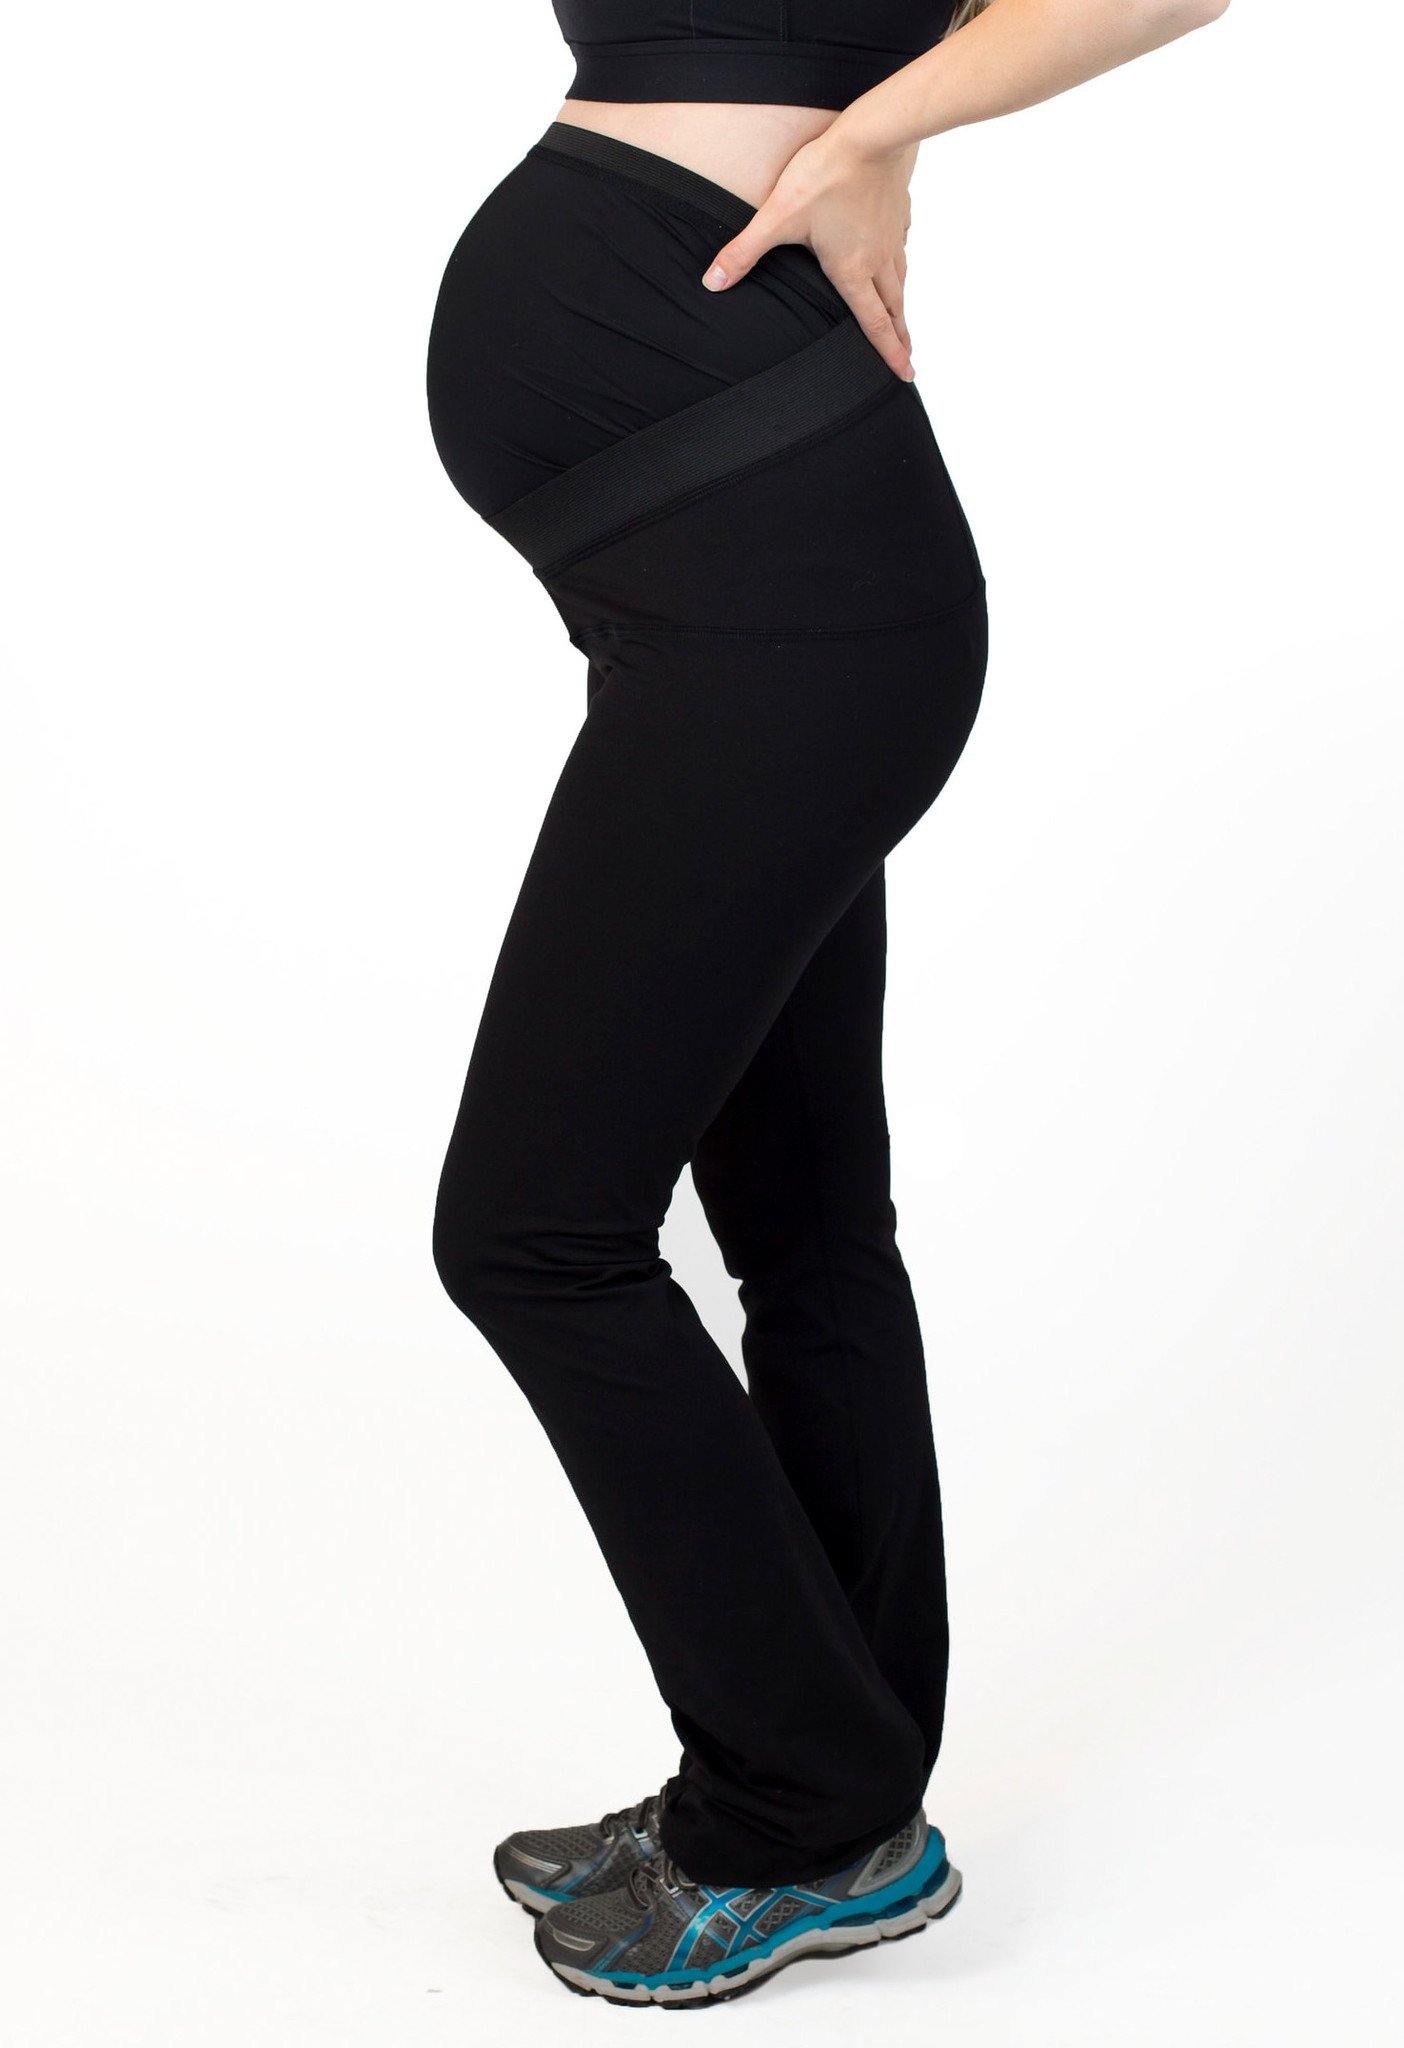 Pregnant Women's Leggings Over The Belly Yoga Workout Maternity Active Pants